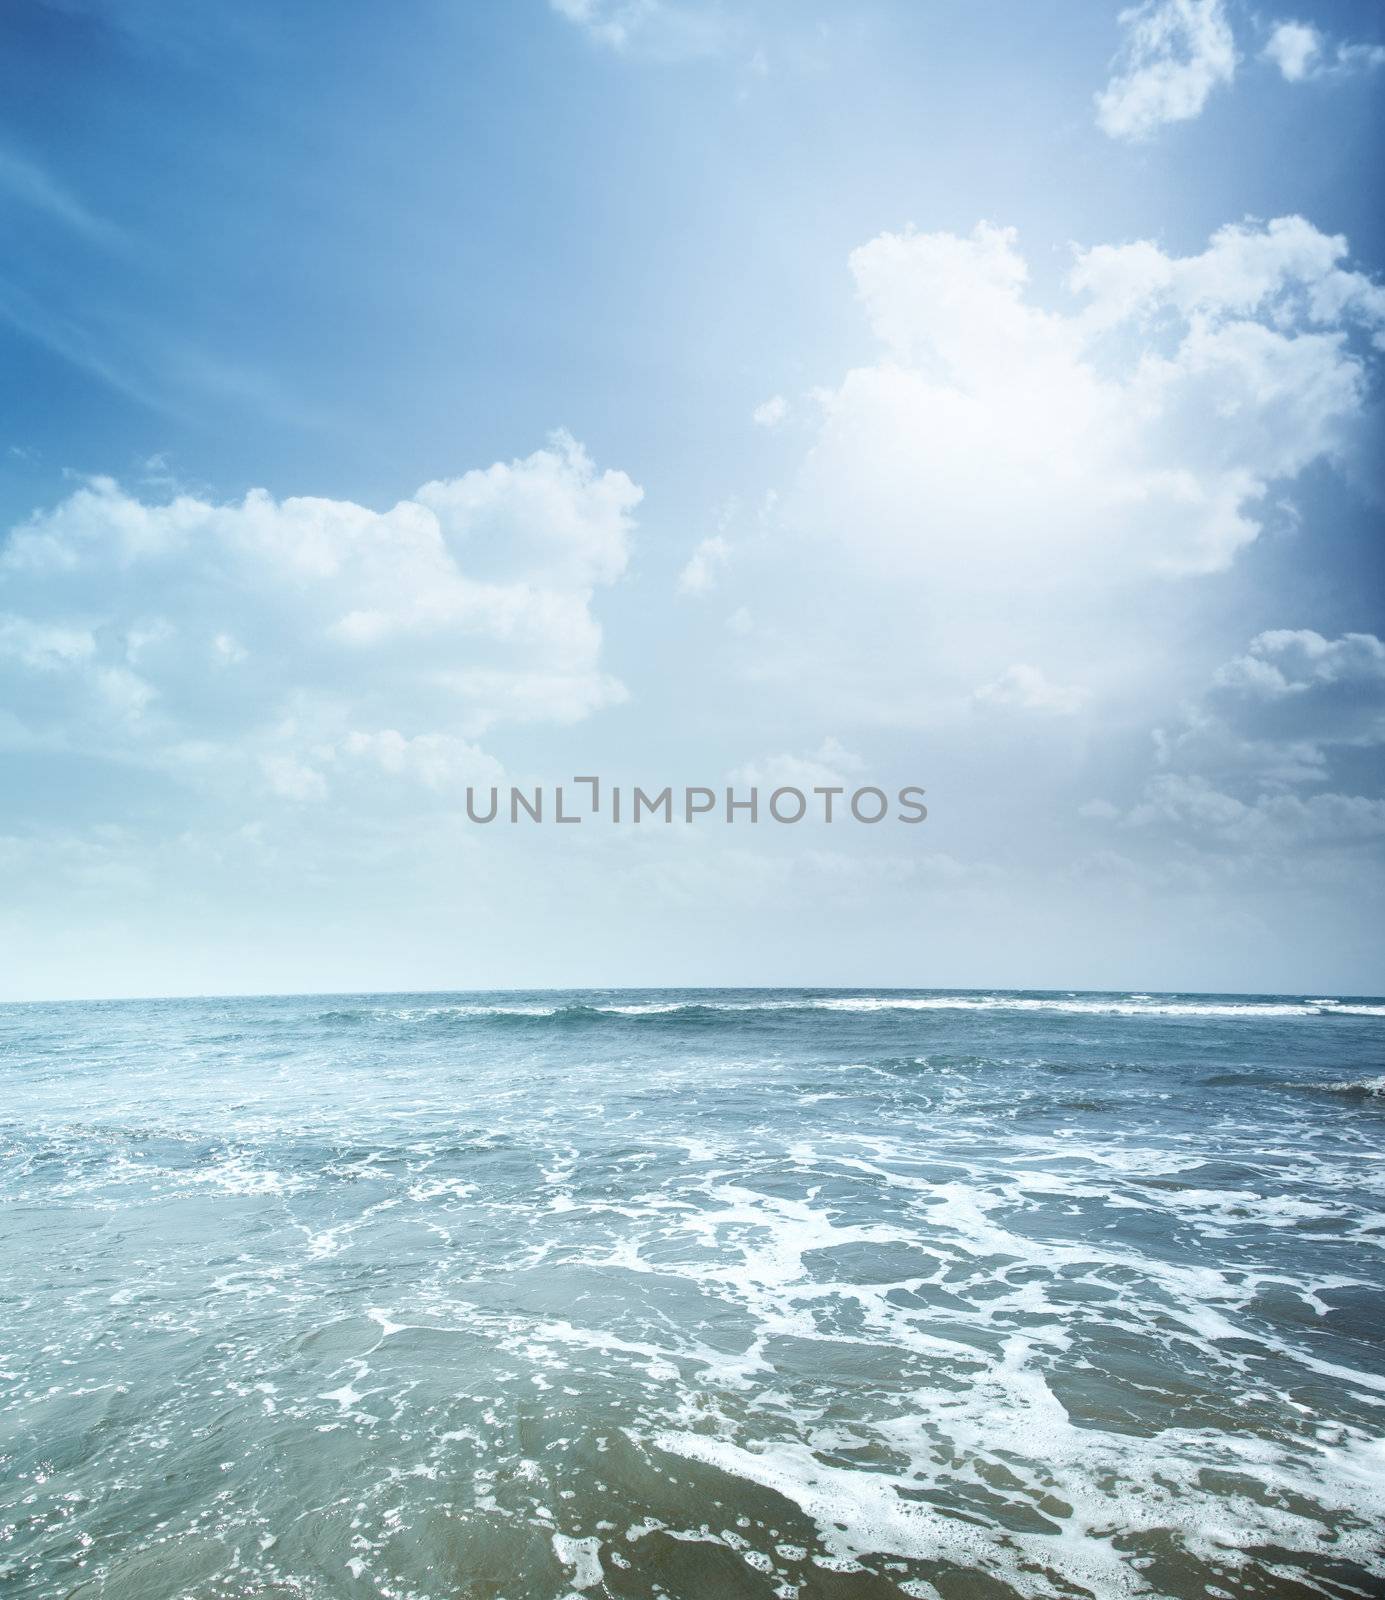 Vertical photo of the blue sea with foam and cloudy sky. Vibrant colors